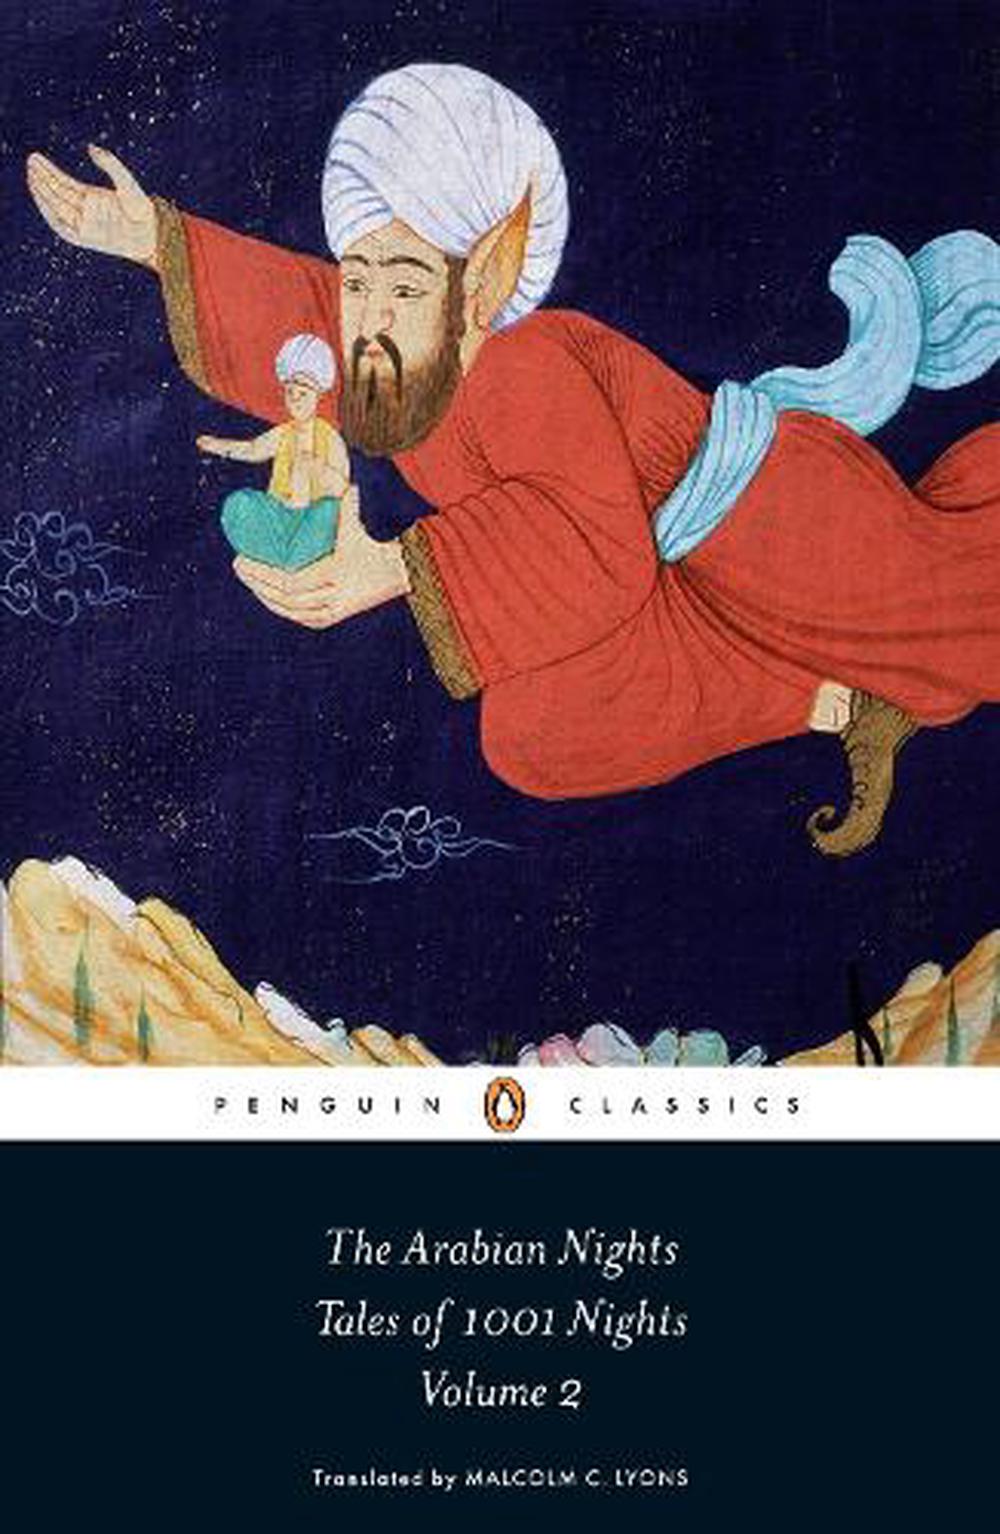 The Arabian Nights Tales Of 1001 Nights By Trans Malcolm Lyons